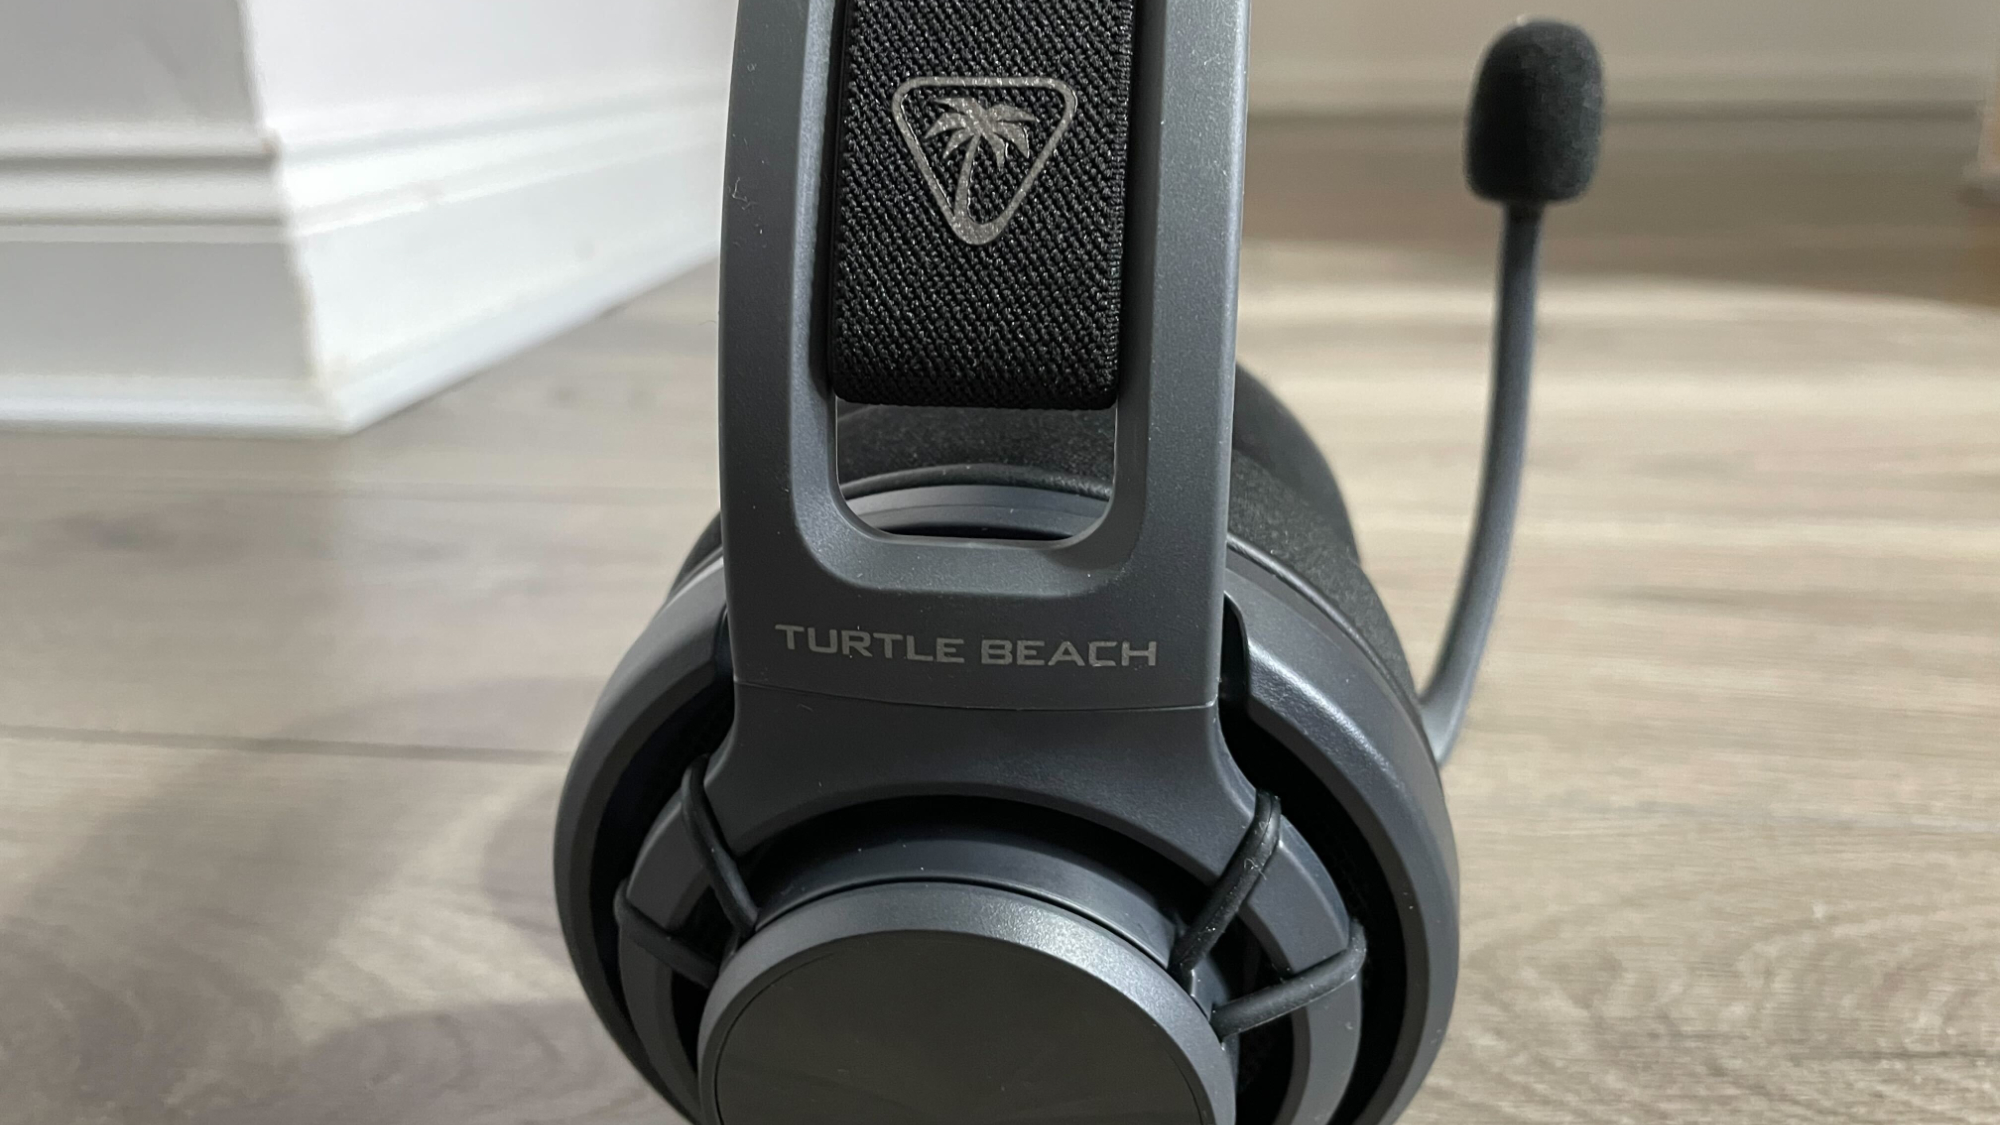 A side view of the Turtle Beach Atlas Air headset.